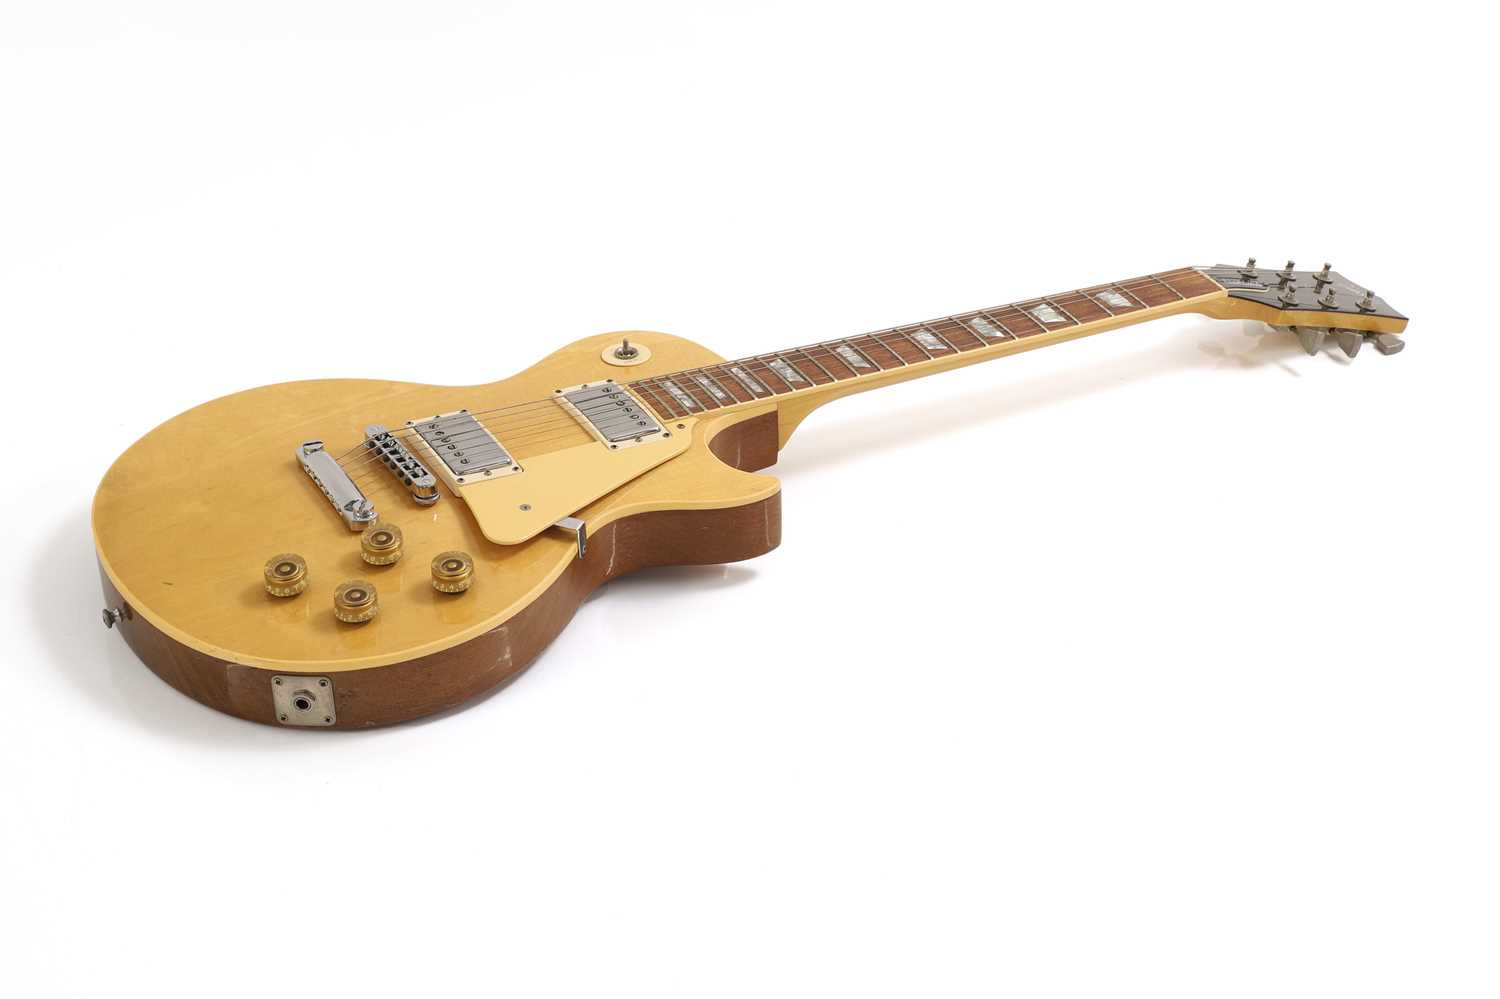 A 1979 Gibson Les Paul 'Standard' electric guitar, - Image 2 of 14